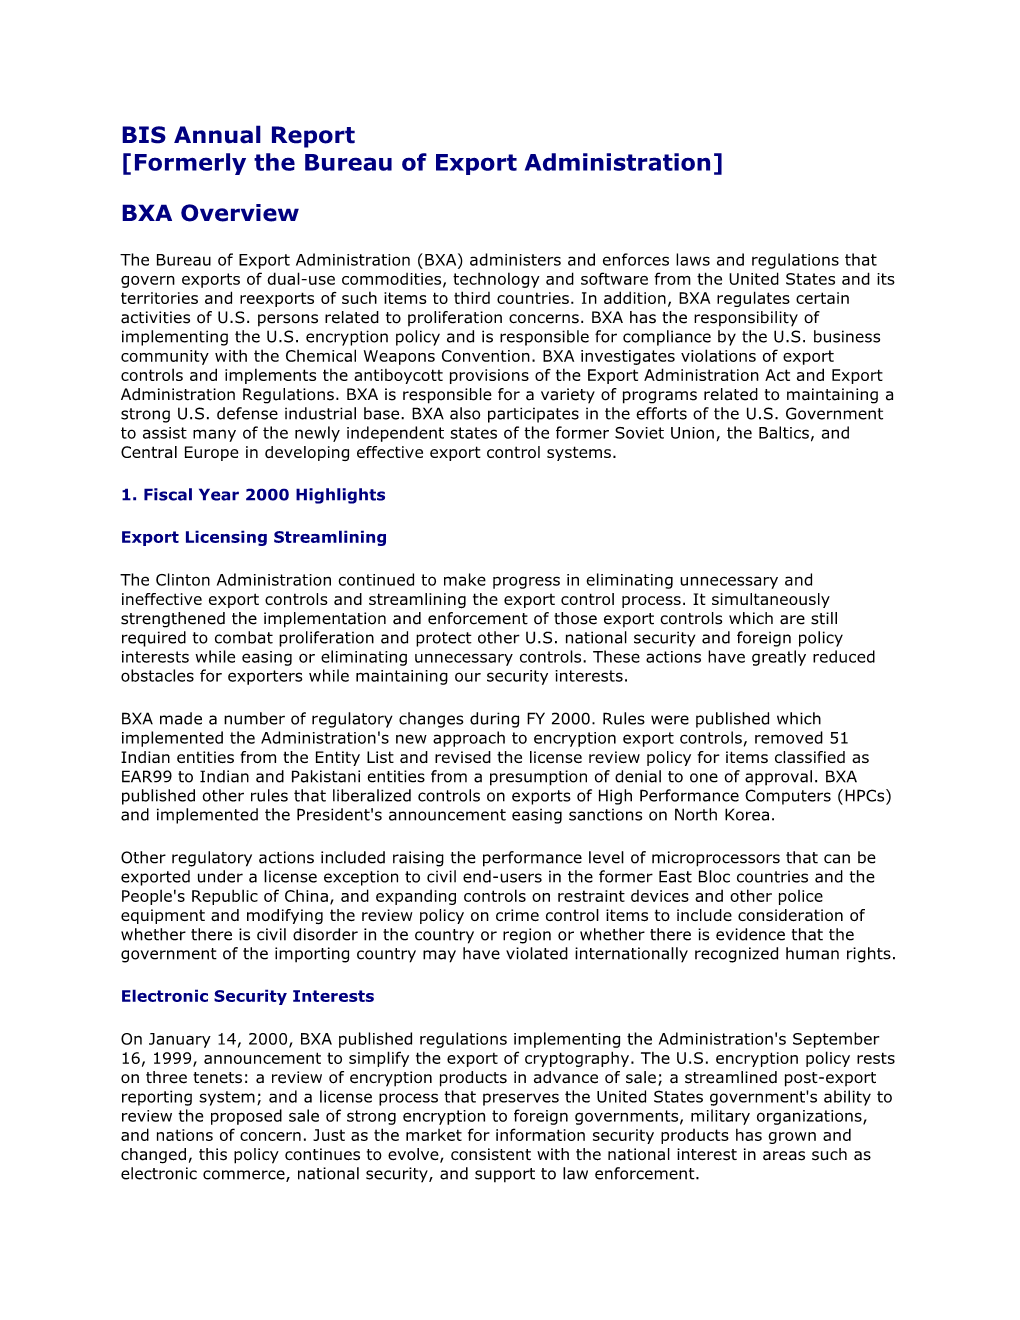 [Formerly the Bureau of Export Administration] BXA Overview